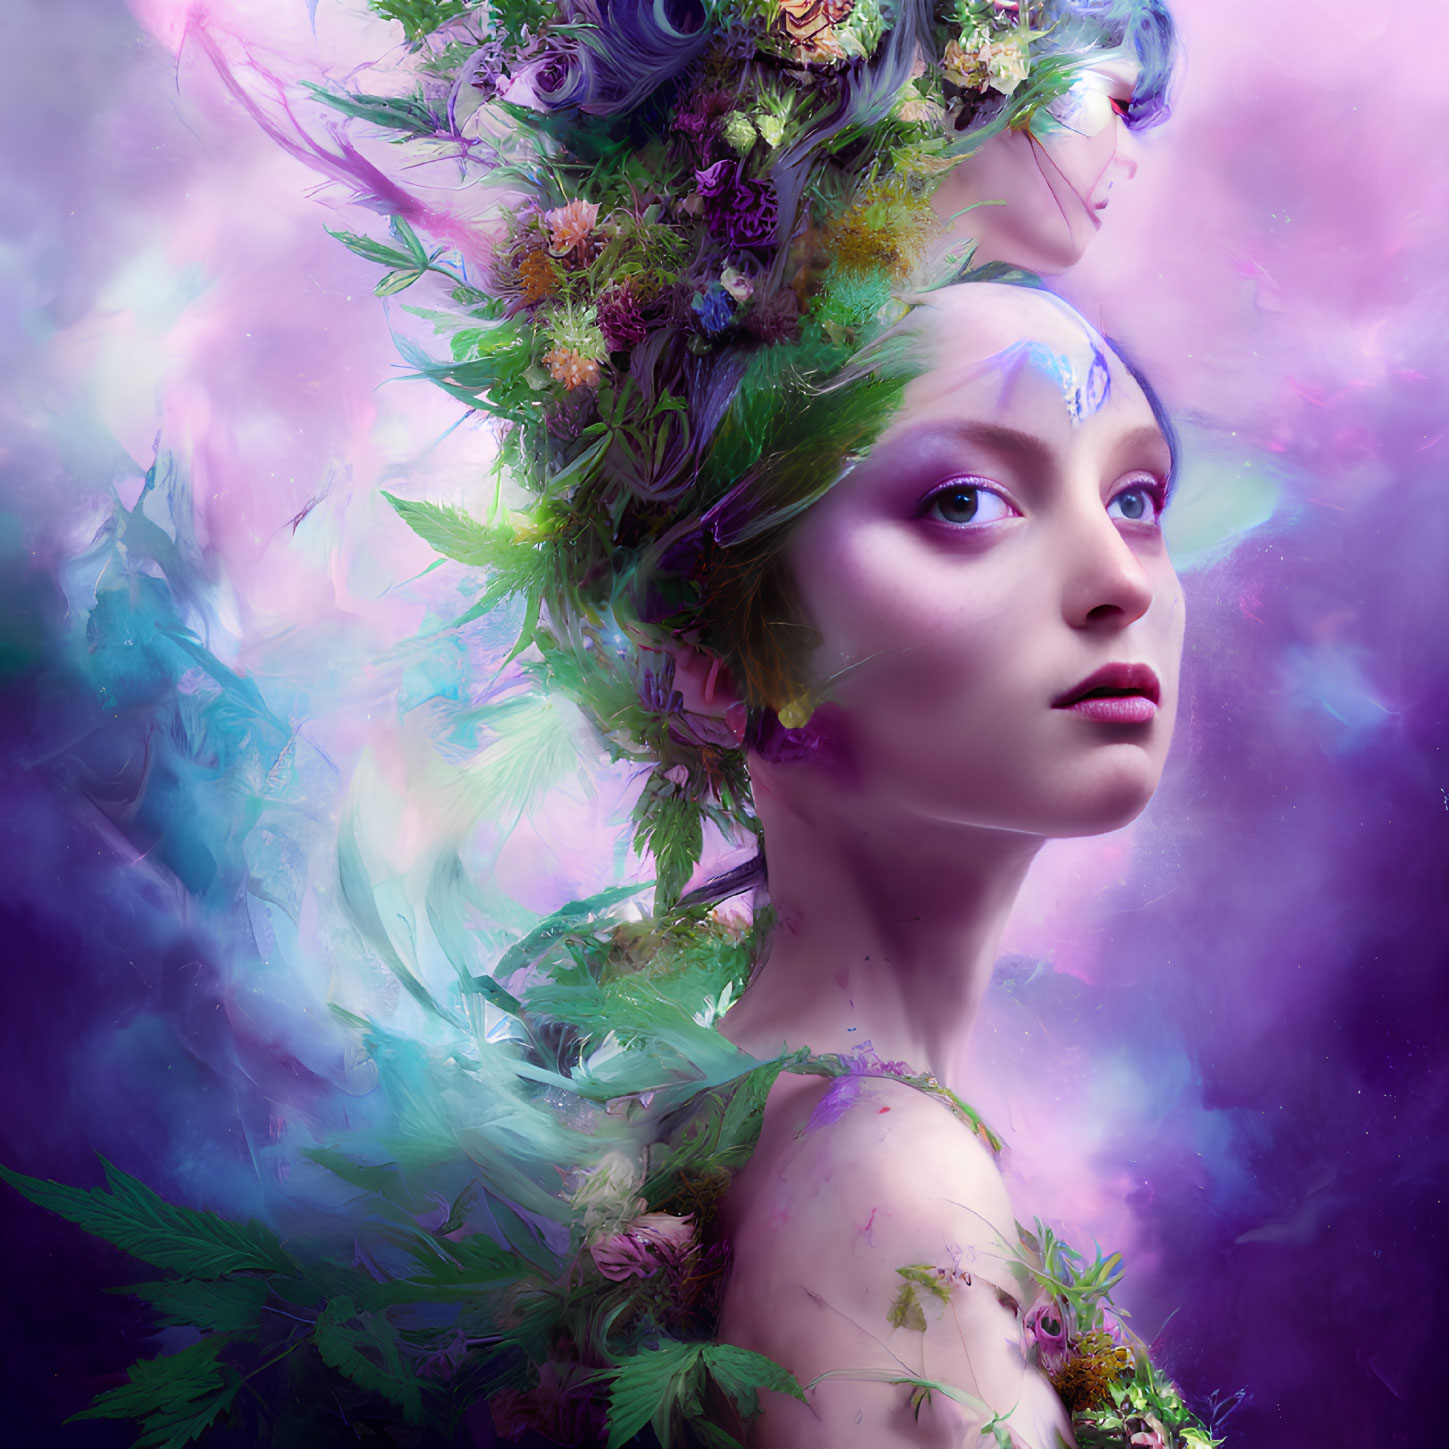 Surreal portrait of woman with floral and feather motifs on vibrant backdrop